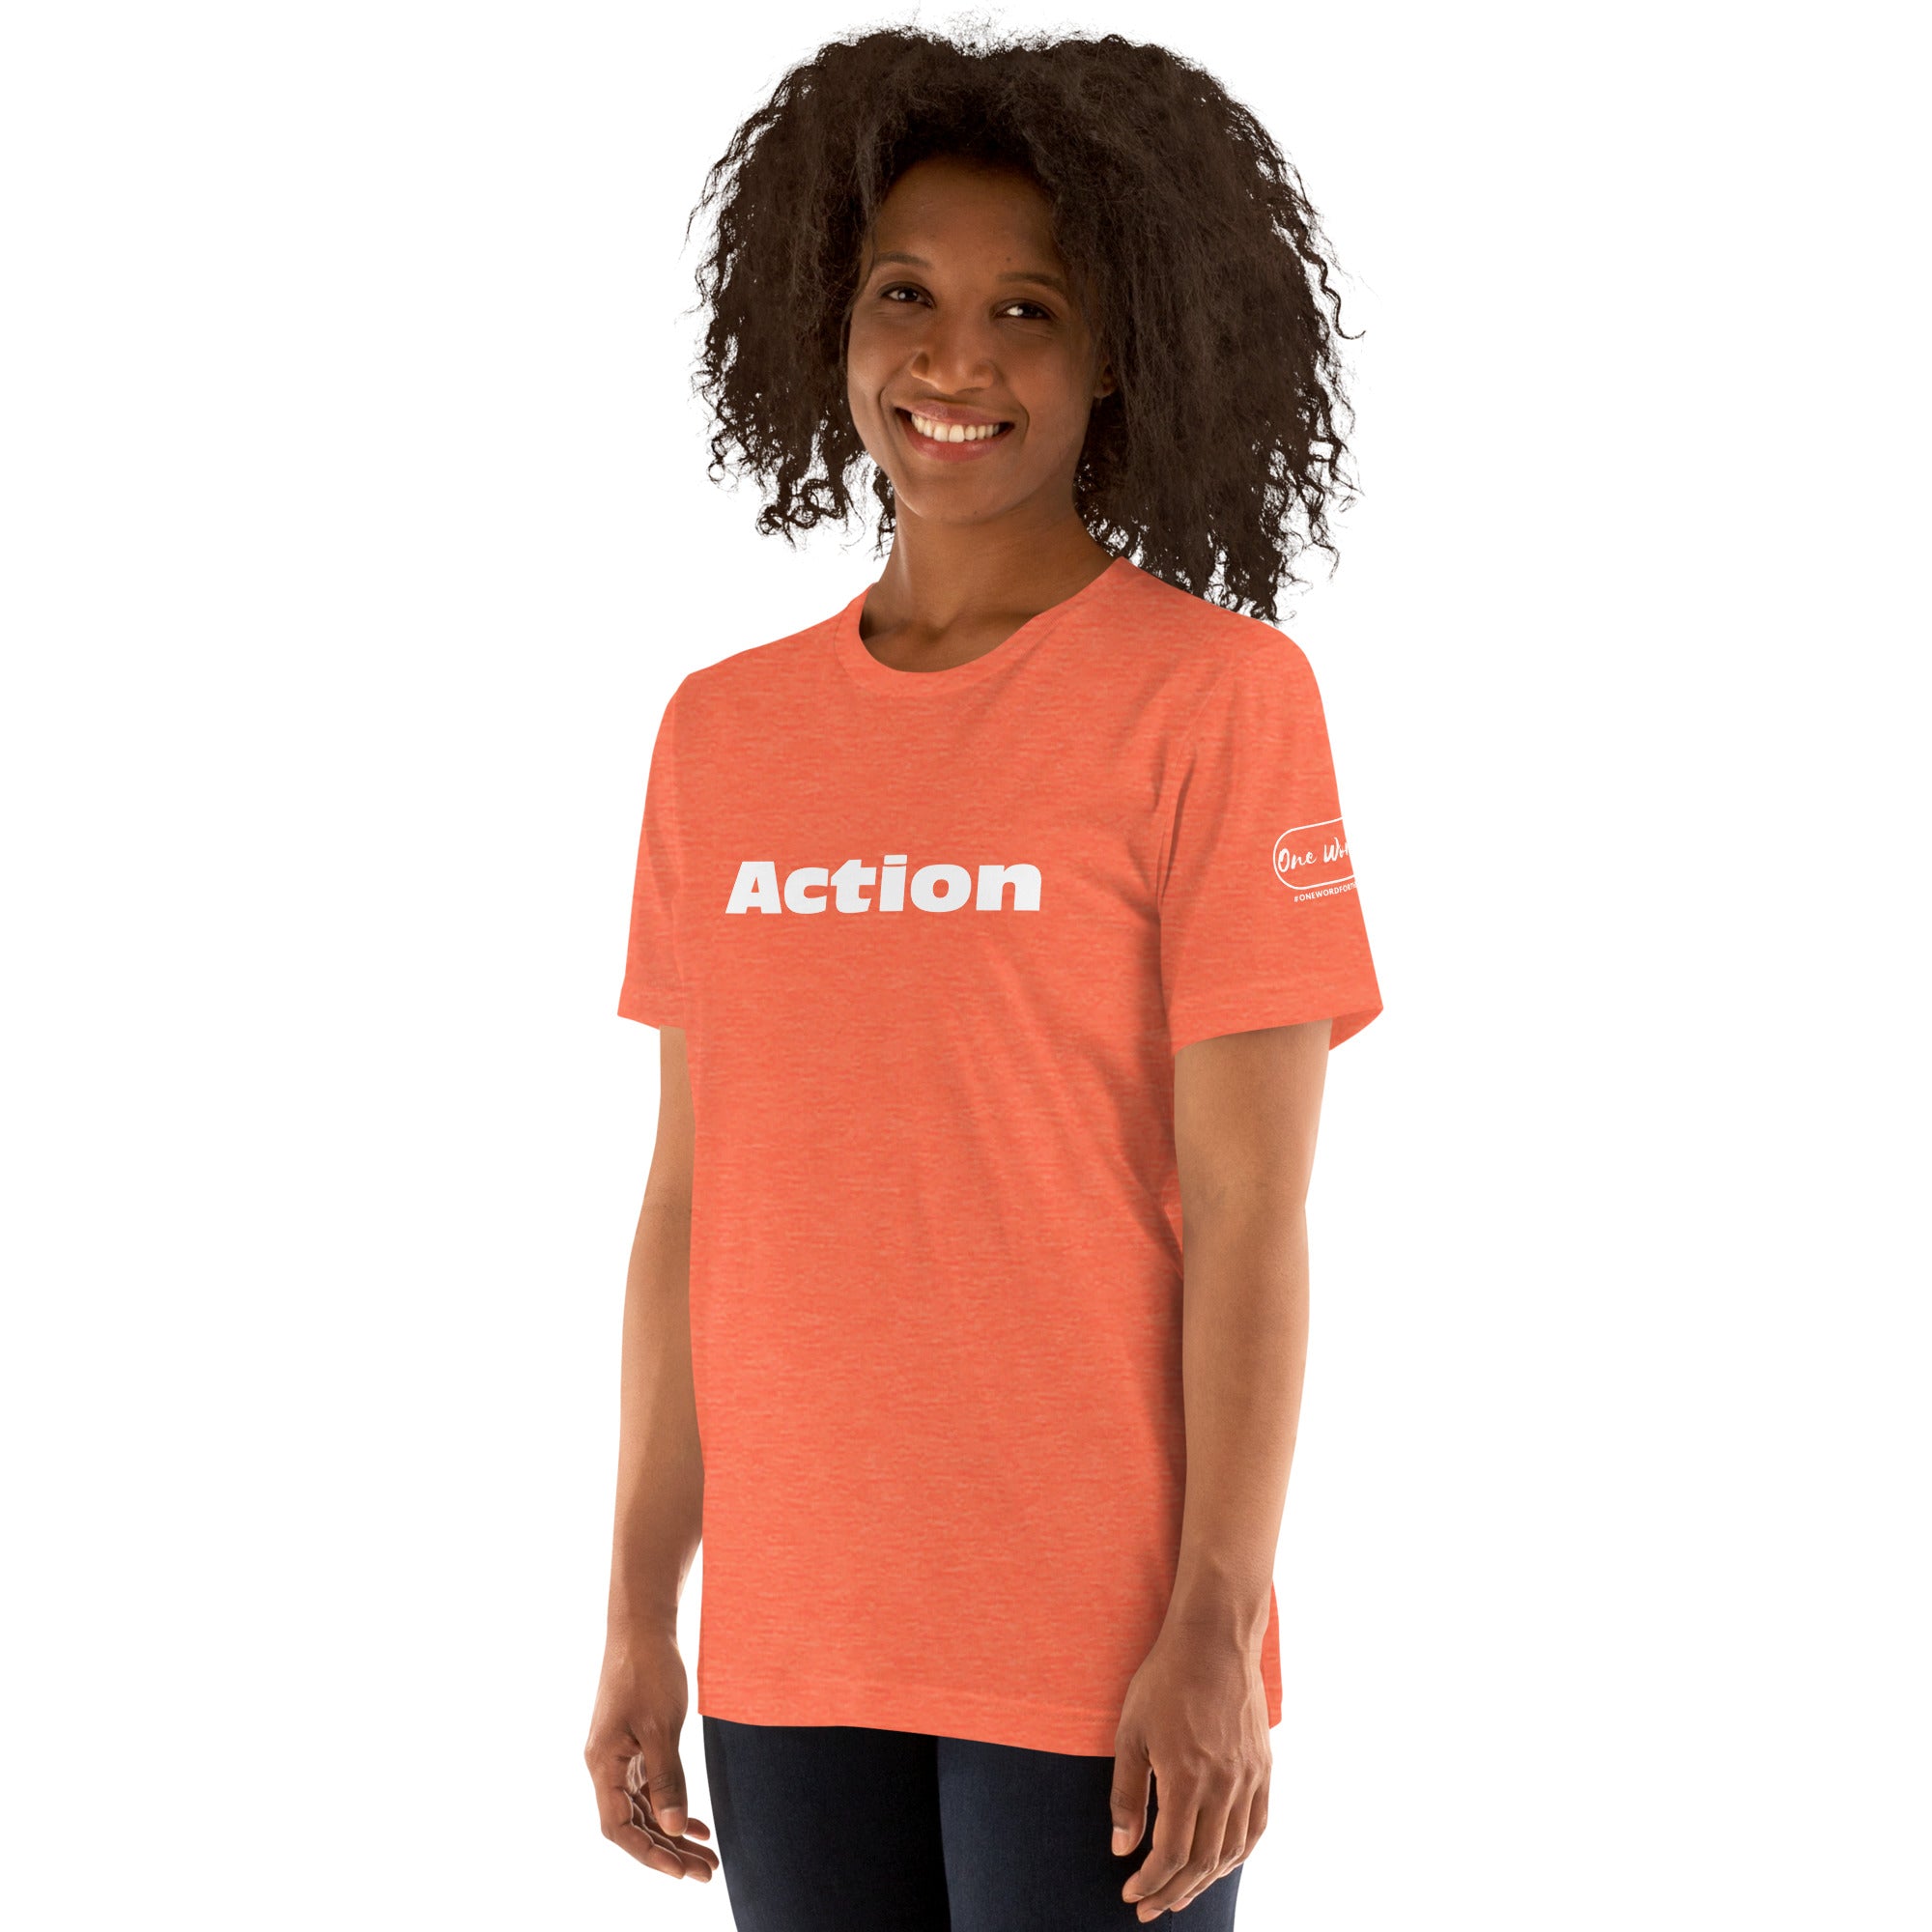 Action-Inspired T-shirt | Faith Apparel | One-Word Unisex T-shirt